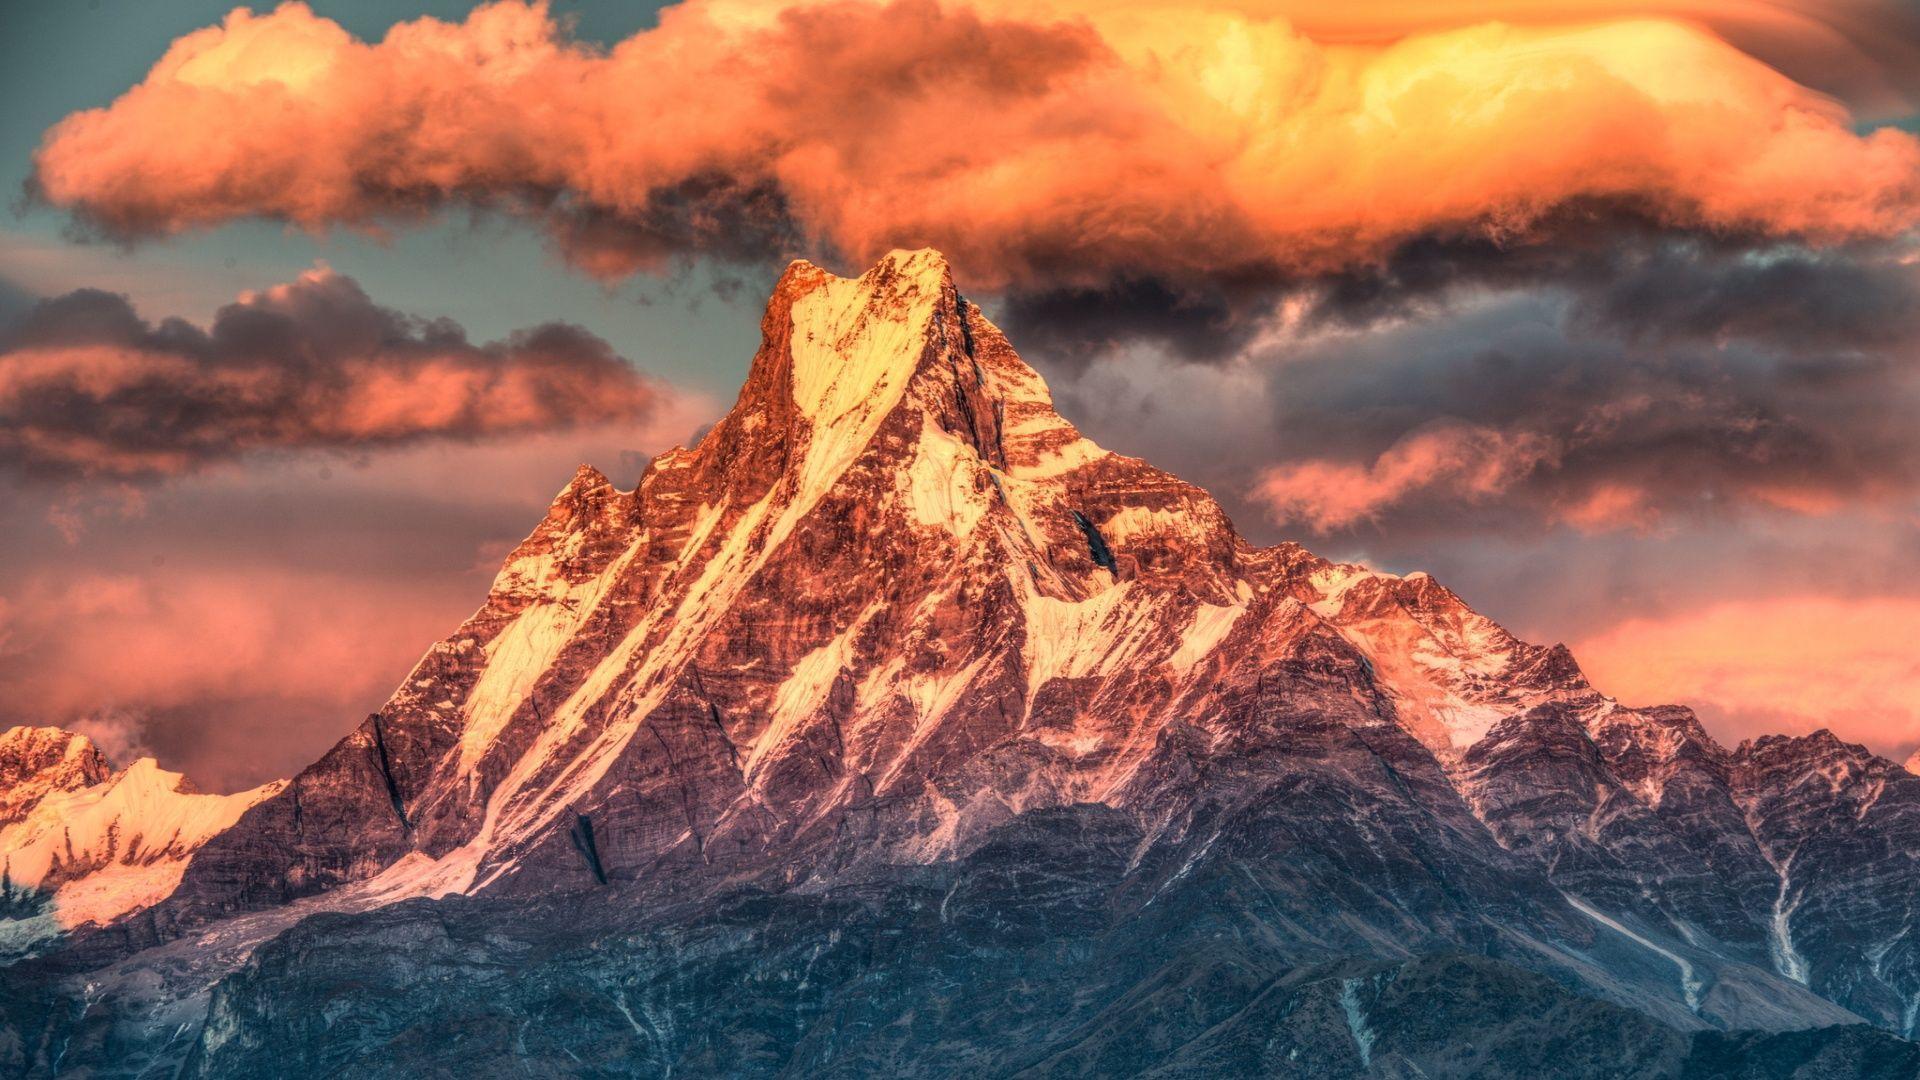 Hd Awesome Himalayan Sunset Wallpaper Download Fr 1920x1080PX